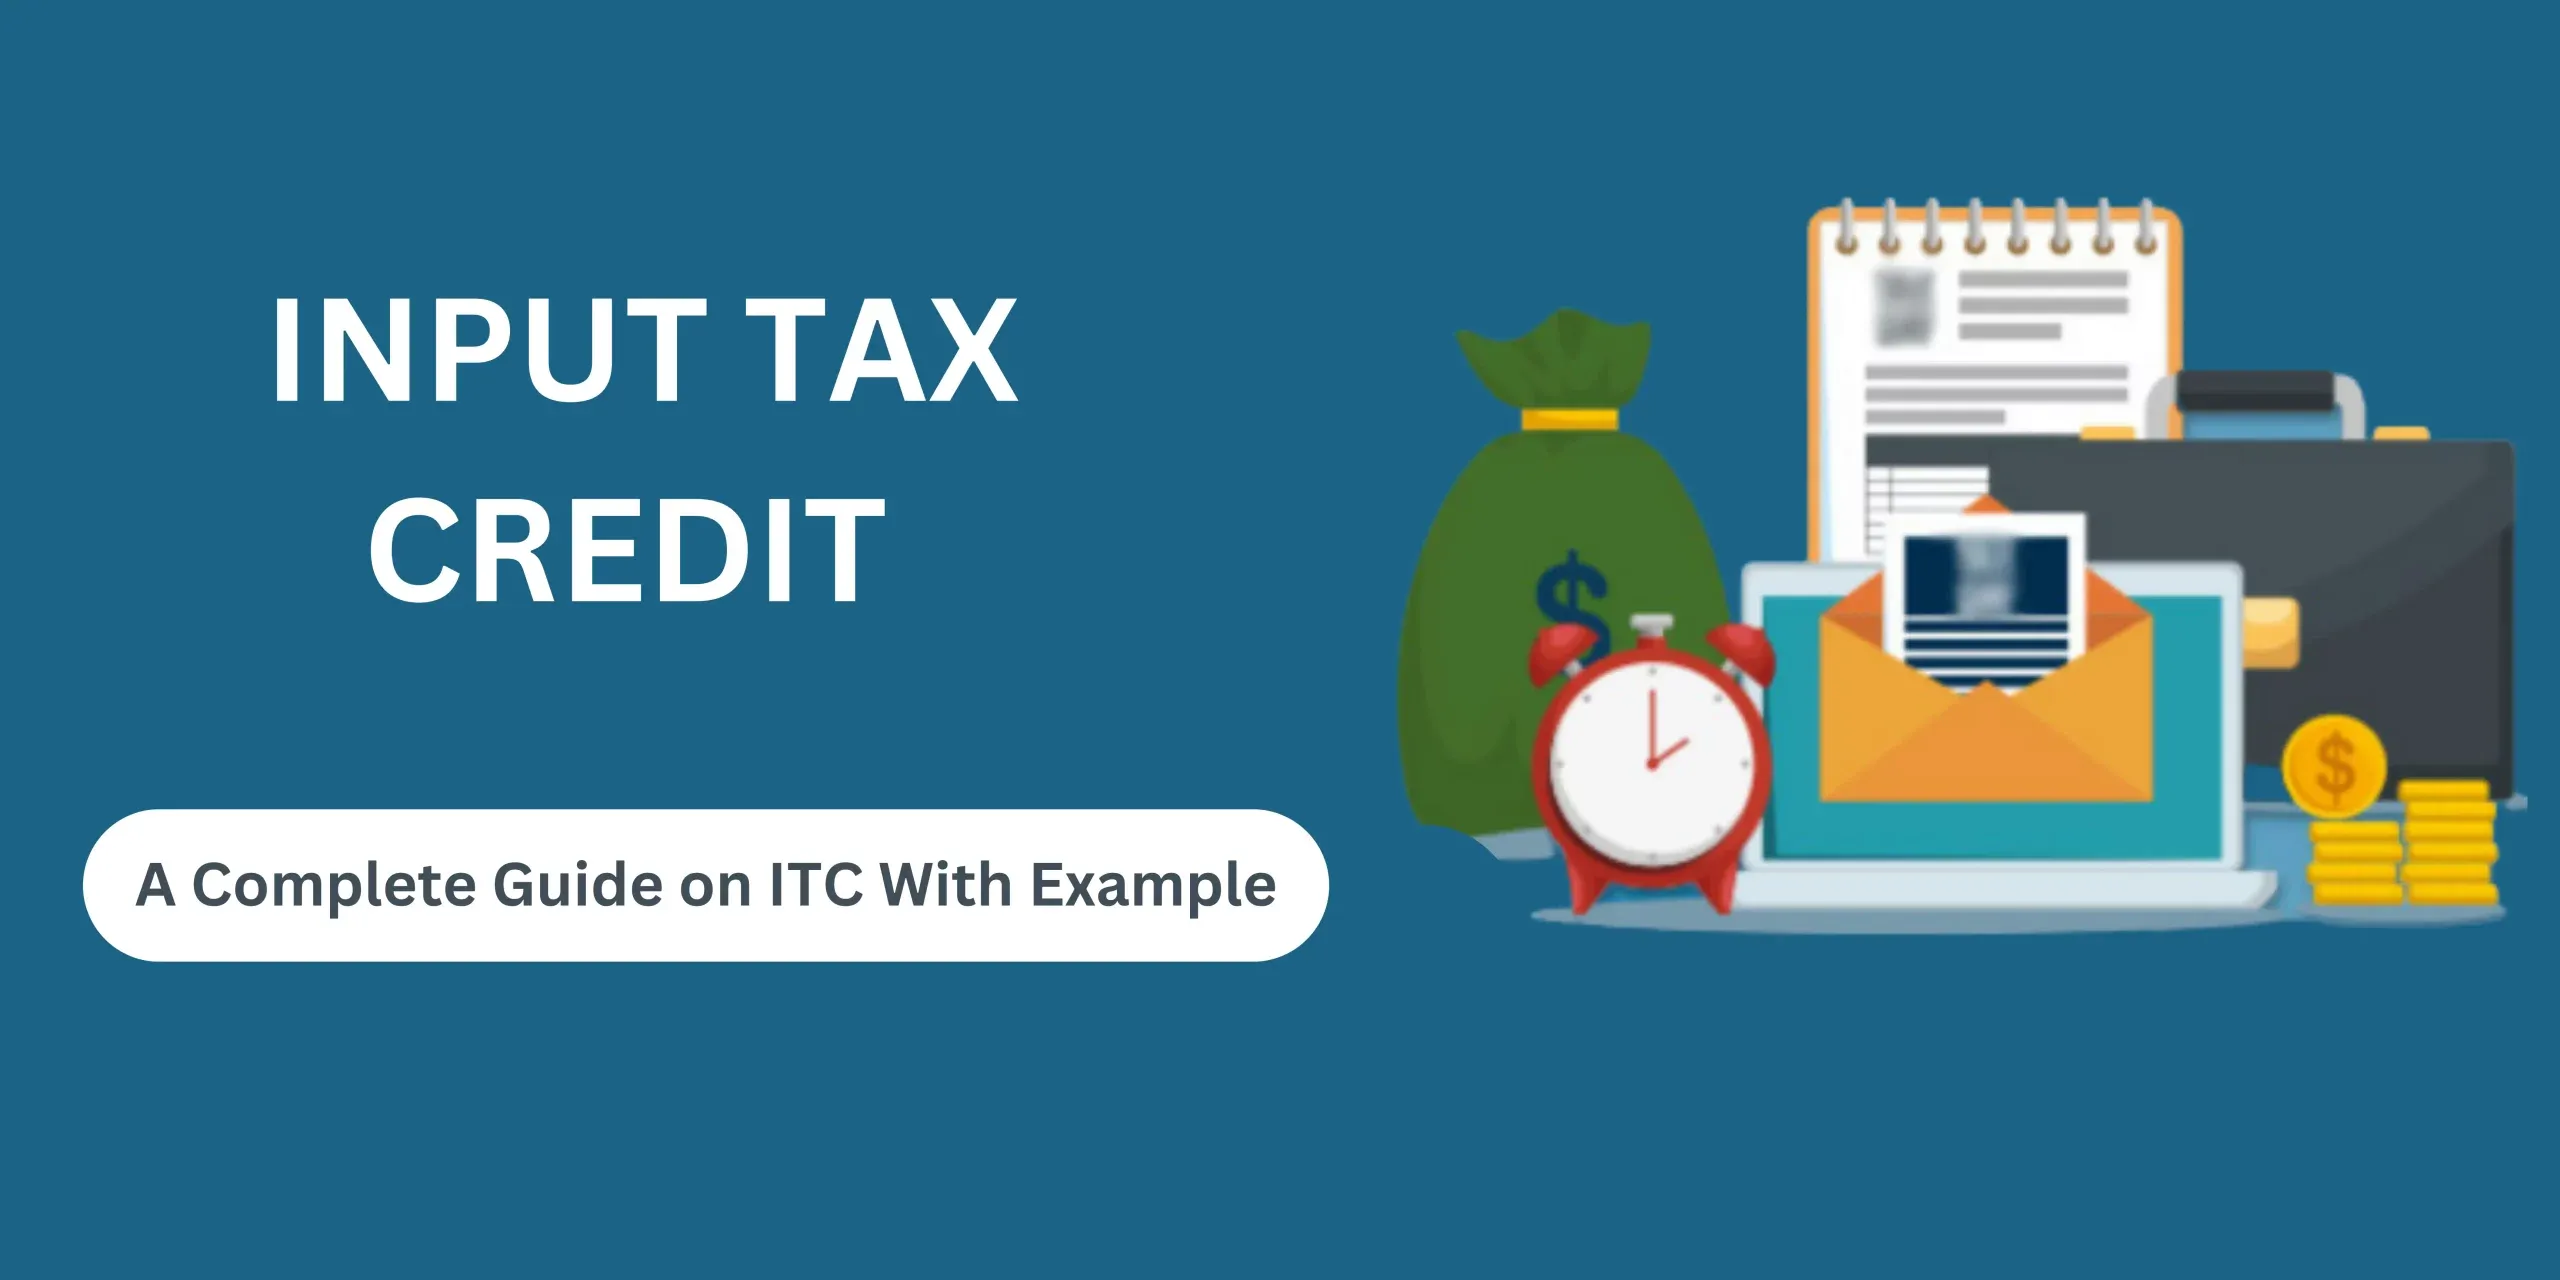 A Complete Guide on Input Tax Credit (ITC) Under GST with Example.